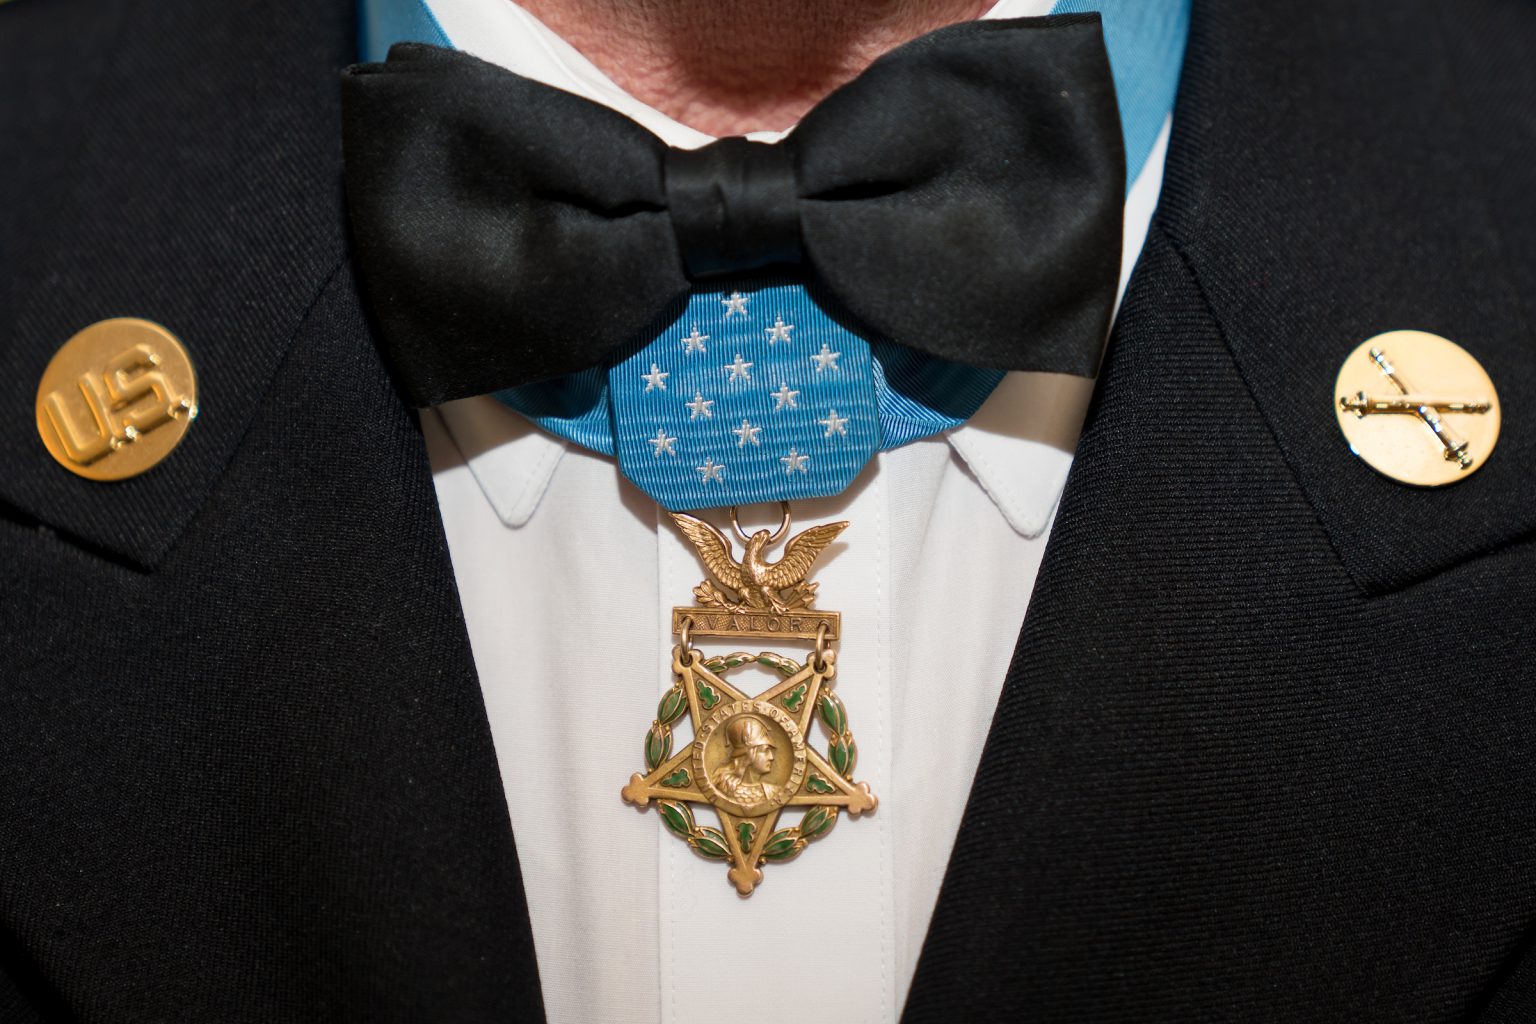 do medal of honor recipients get paid